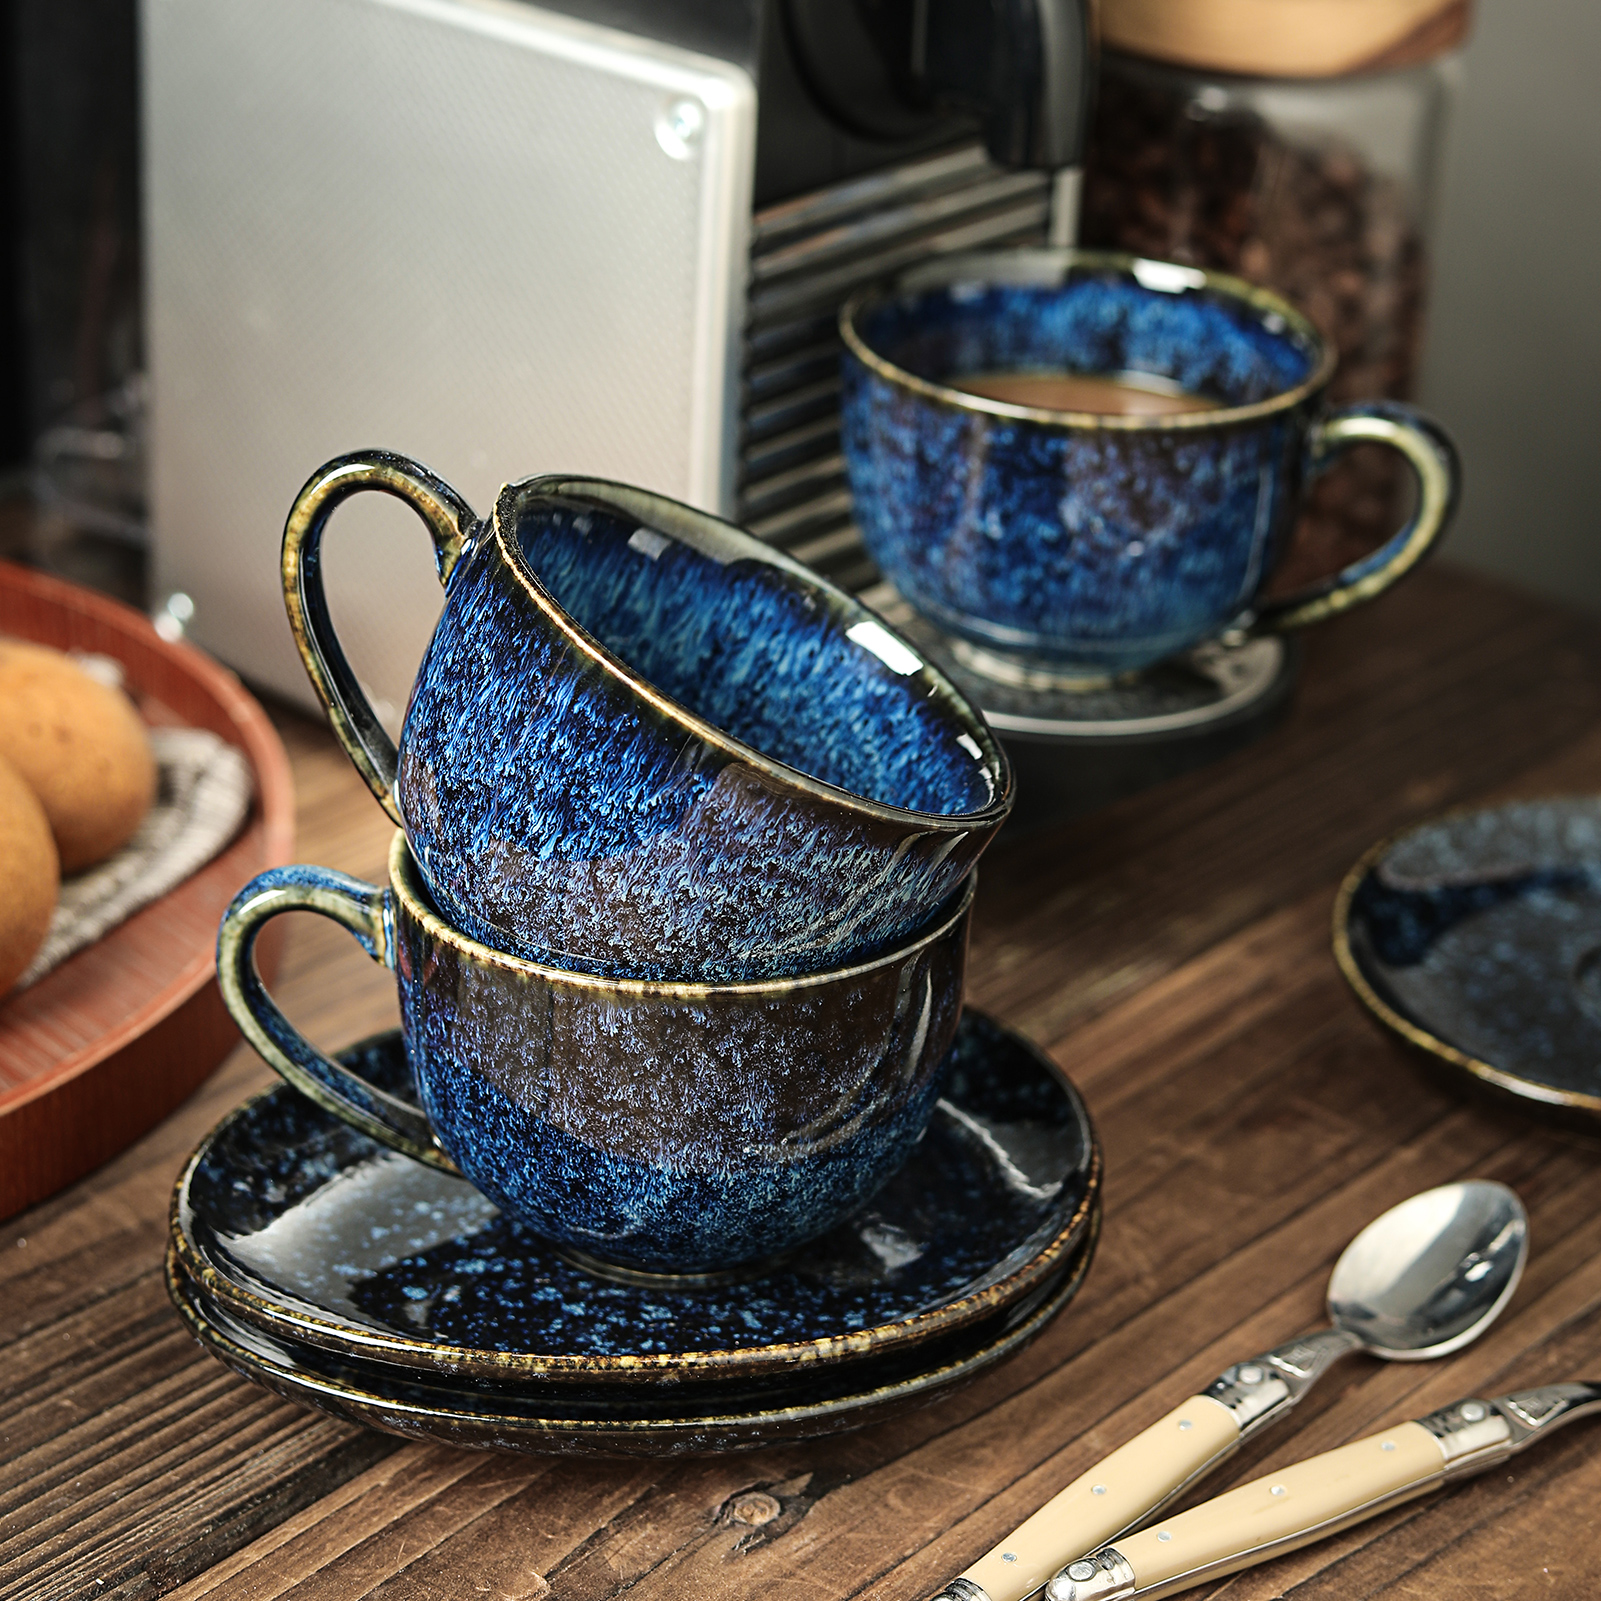  vicrays 6.5 oz Cappuccino Cups with Saucers, Set of 4, Ceramic Coffee  Cup for Au Lait, Double shot, Latte, Cafe Mocha, Tea (Starry Blue) :  Everything Else